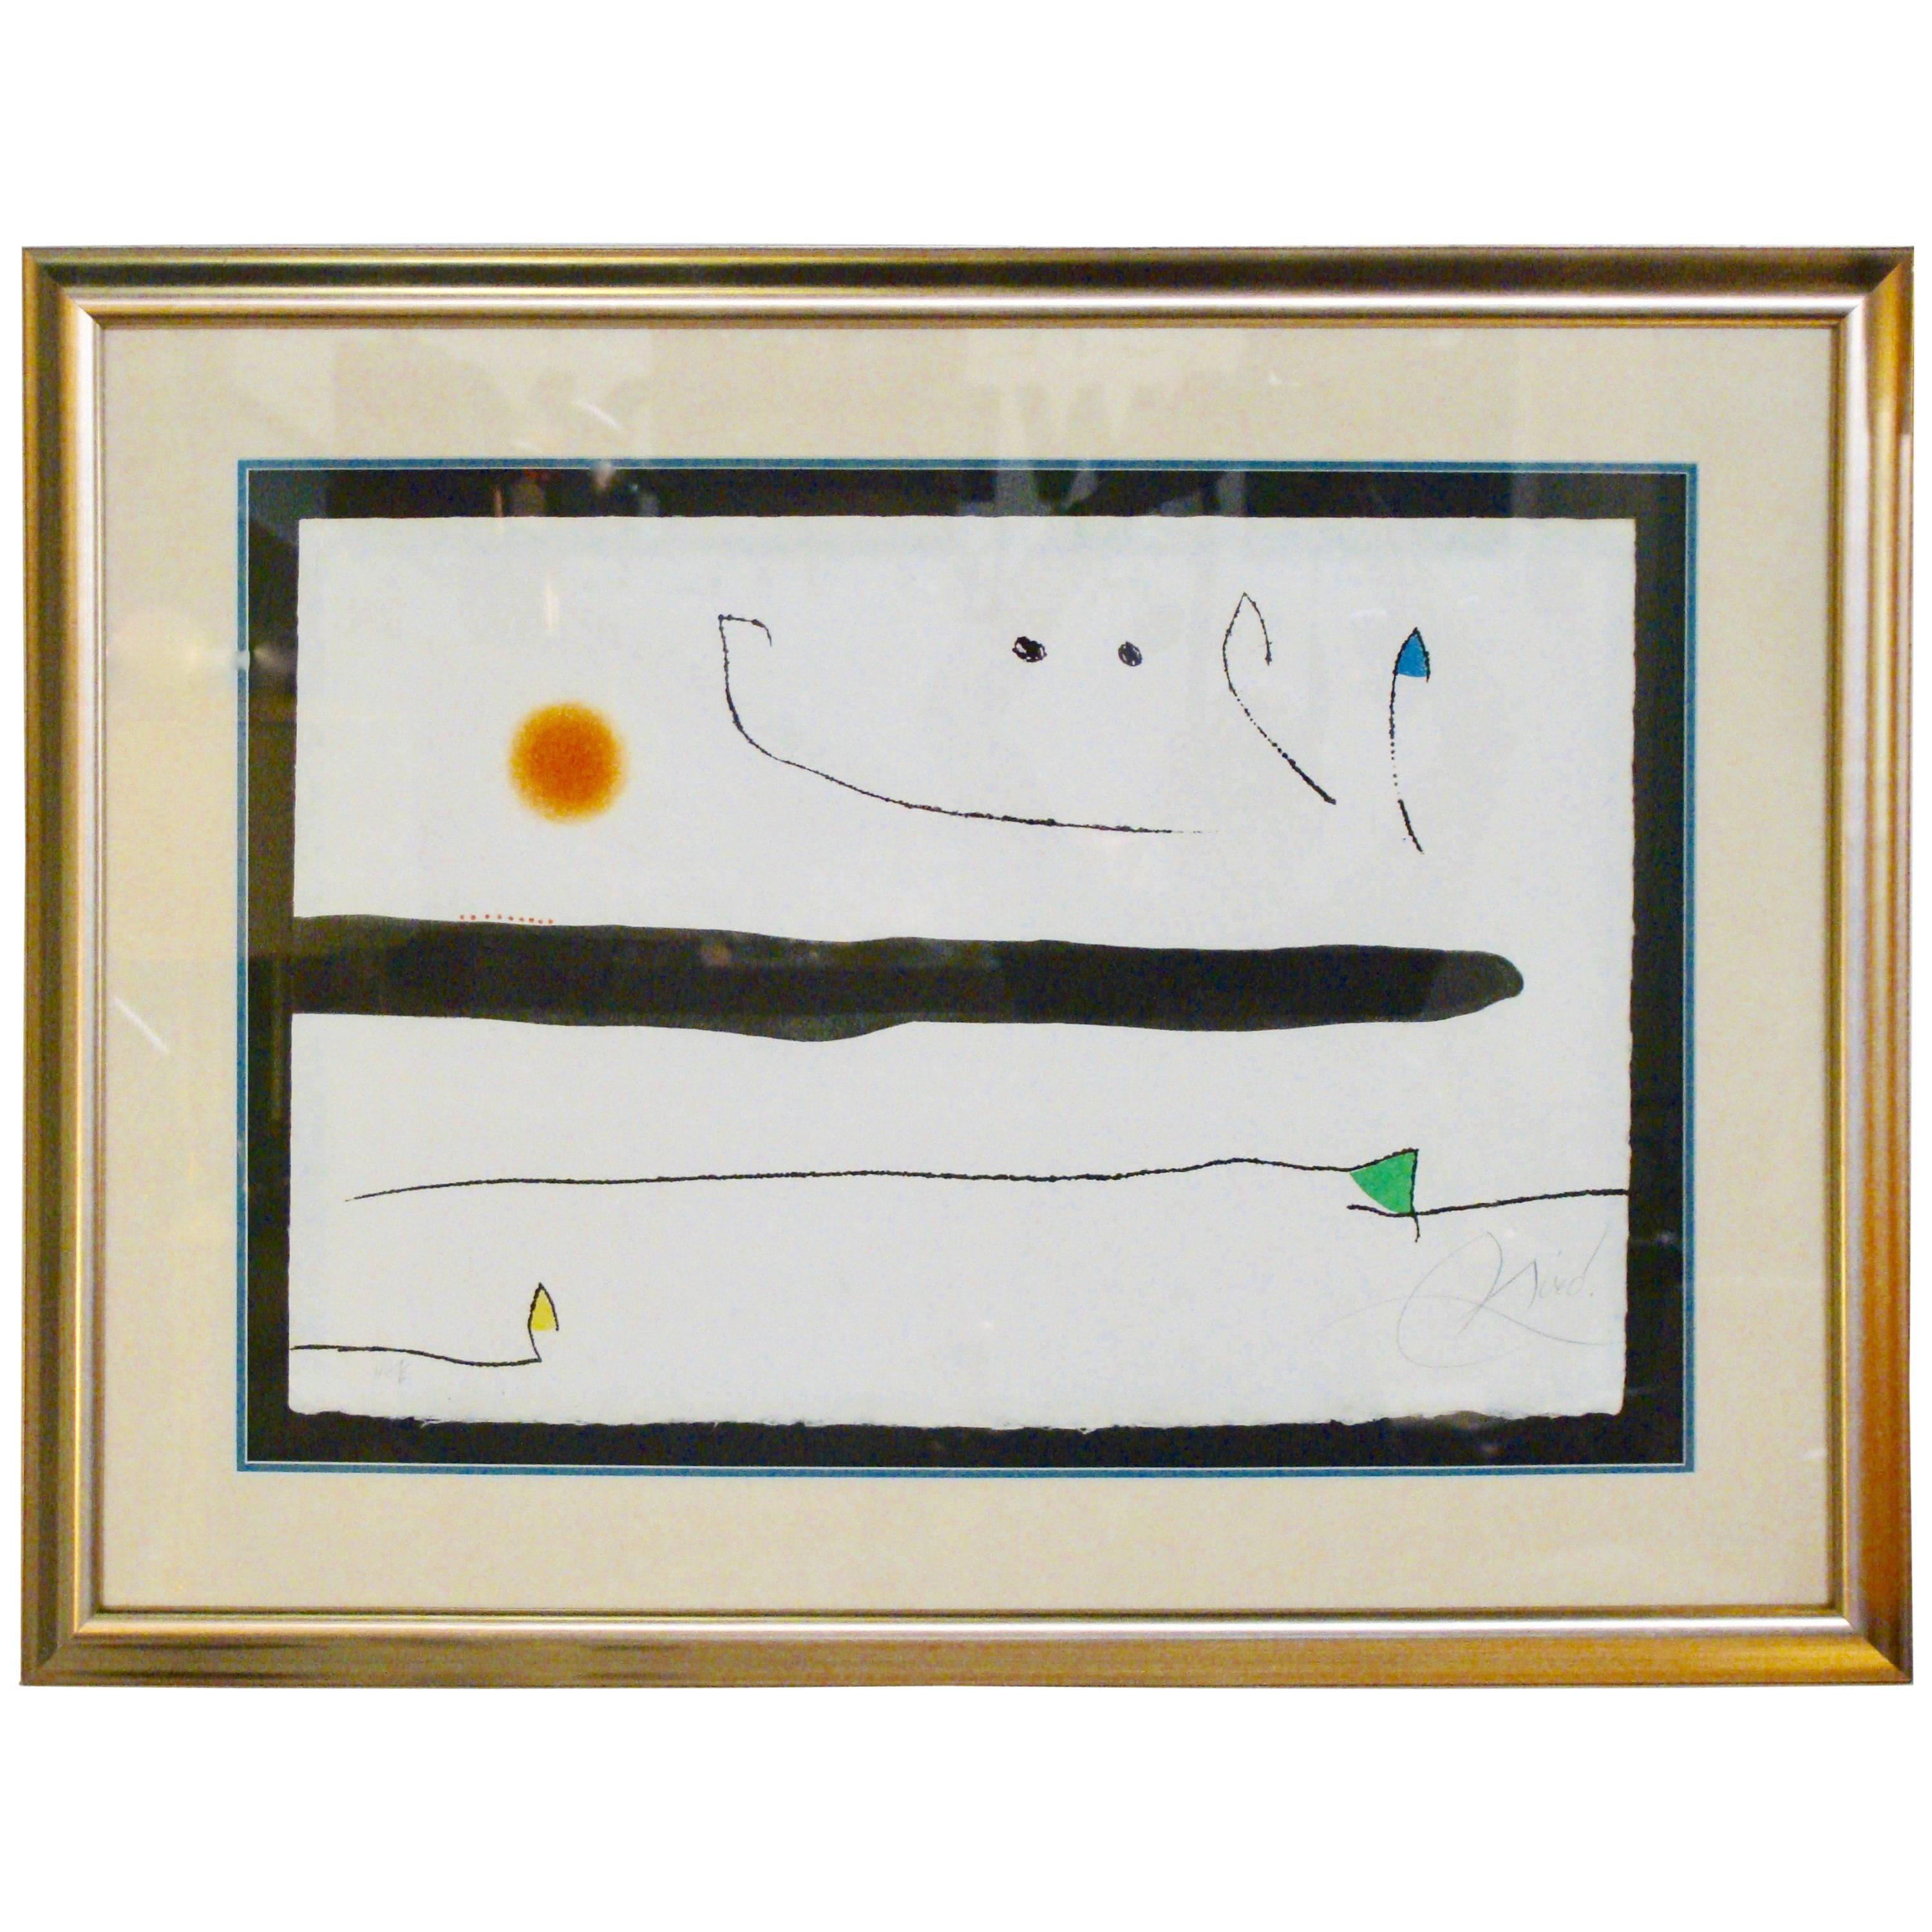 Joan Miro 'Untitled' 'Limited Edition' Aquatint Etching, Signed and Numbered For Sale